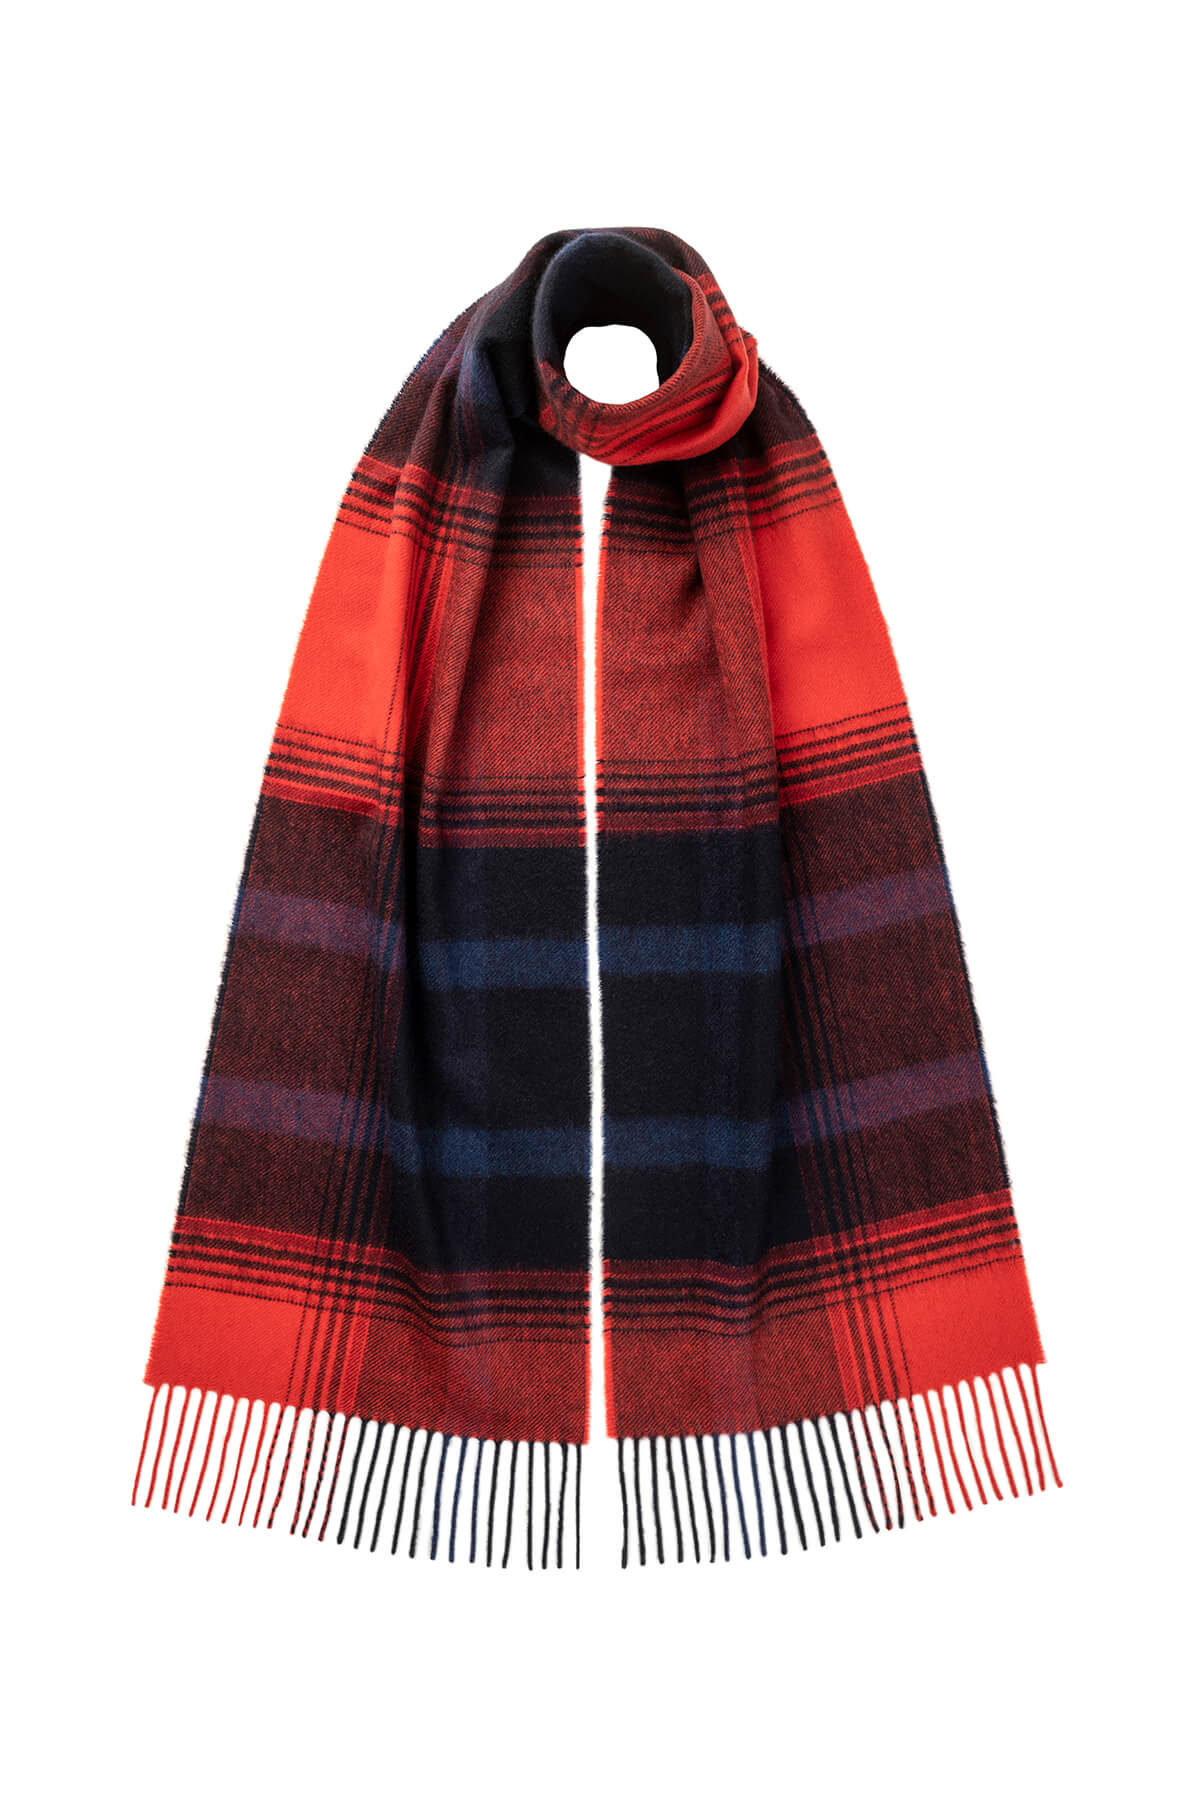 Johnstons of Elgin Asymmetric Check Cashmere Scarf in Red on a white background WA000016RU7319ONE